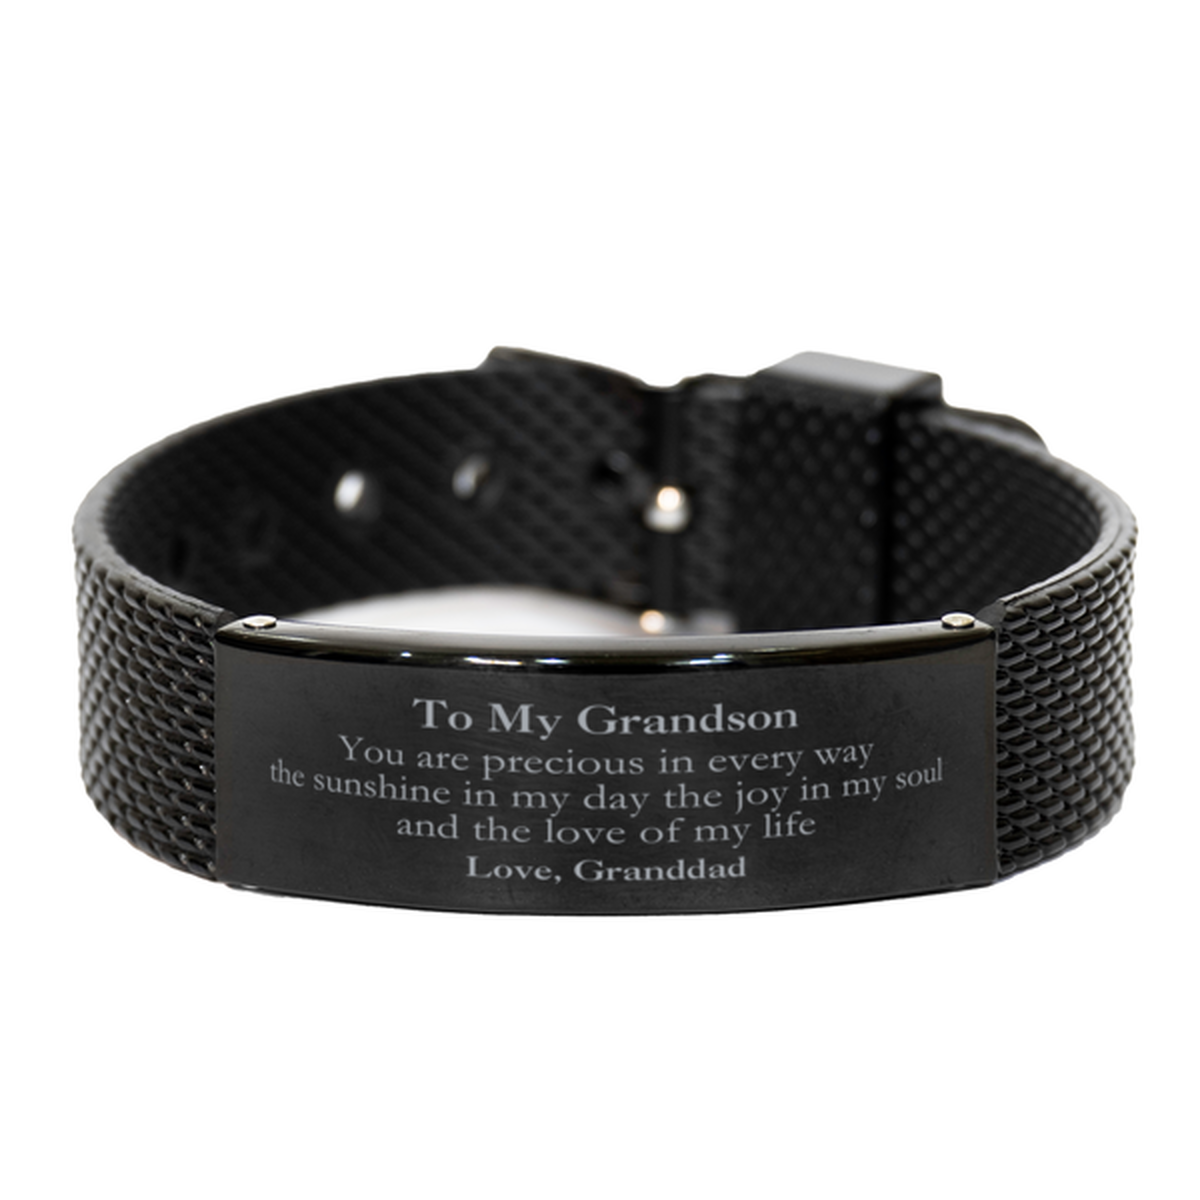 Graduation Gifts for Grandson Black Shark Mesh Bracelet Present from Granddad, Christmas Grandson Birthday Gifts Grandson You are precious in every way the sunshine in my day. Love, Granddad